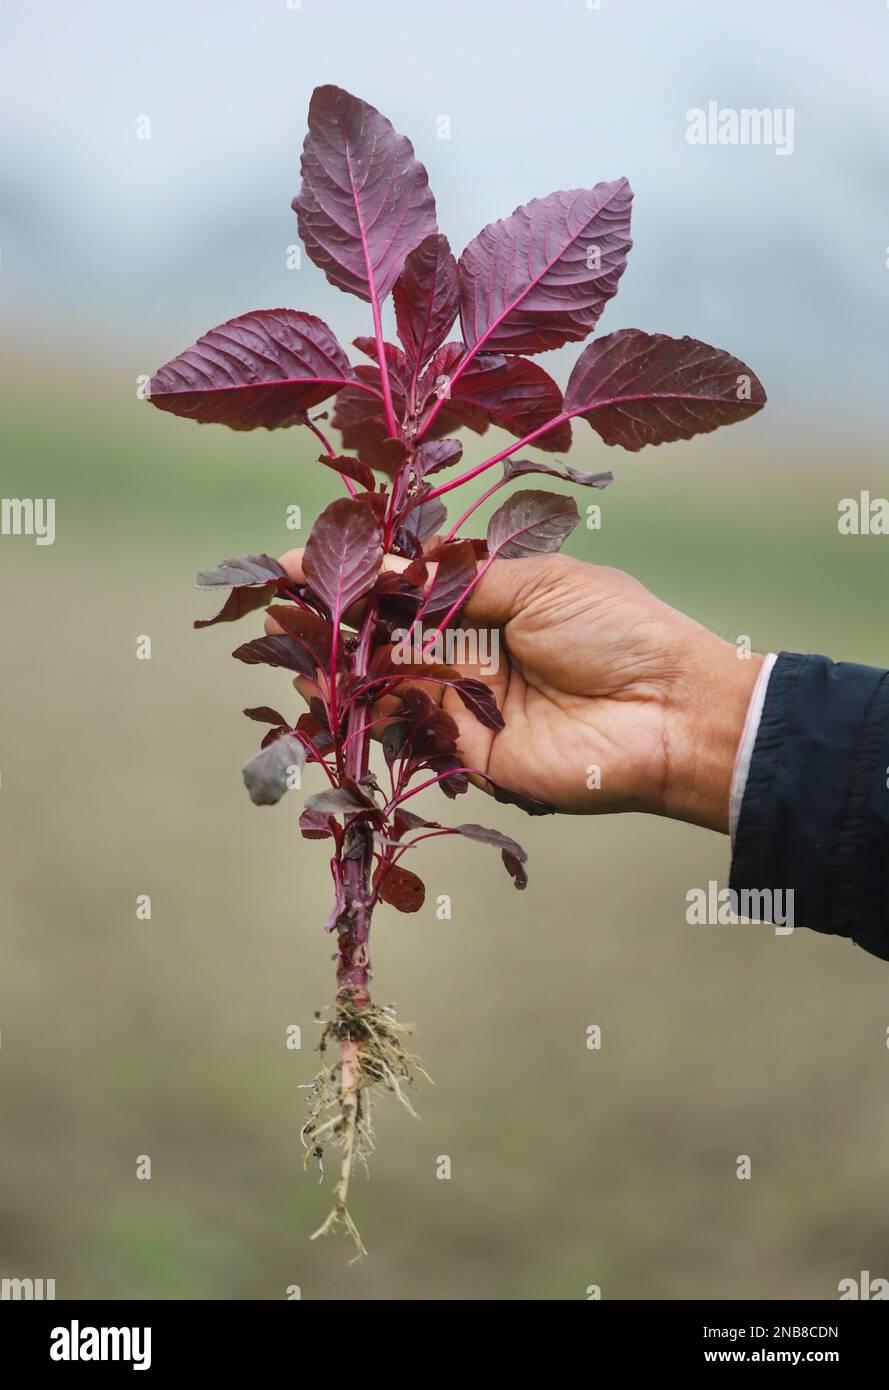 Red amaranth freshly harvested in a farmers hand Stock Photo